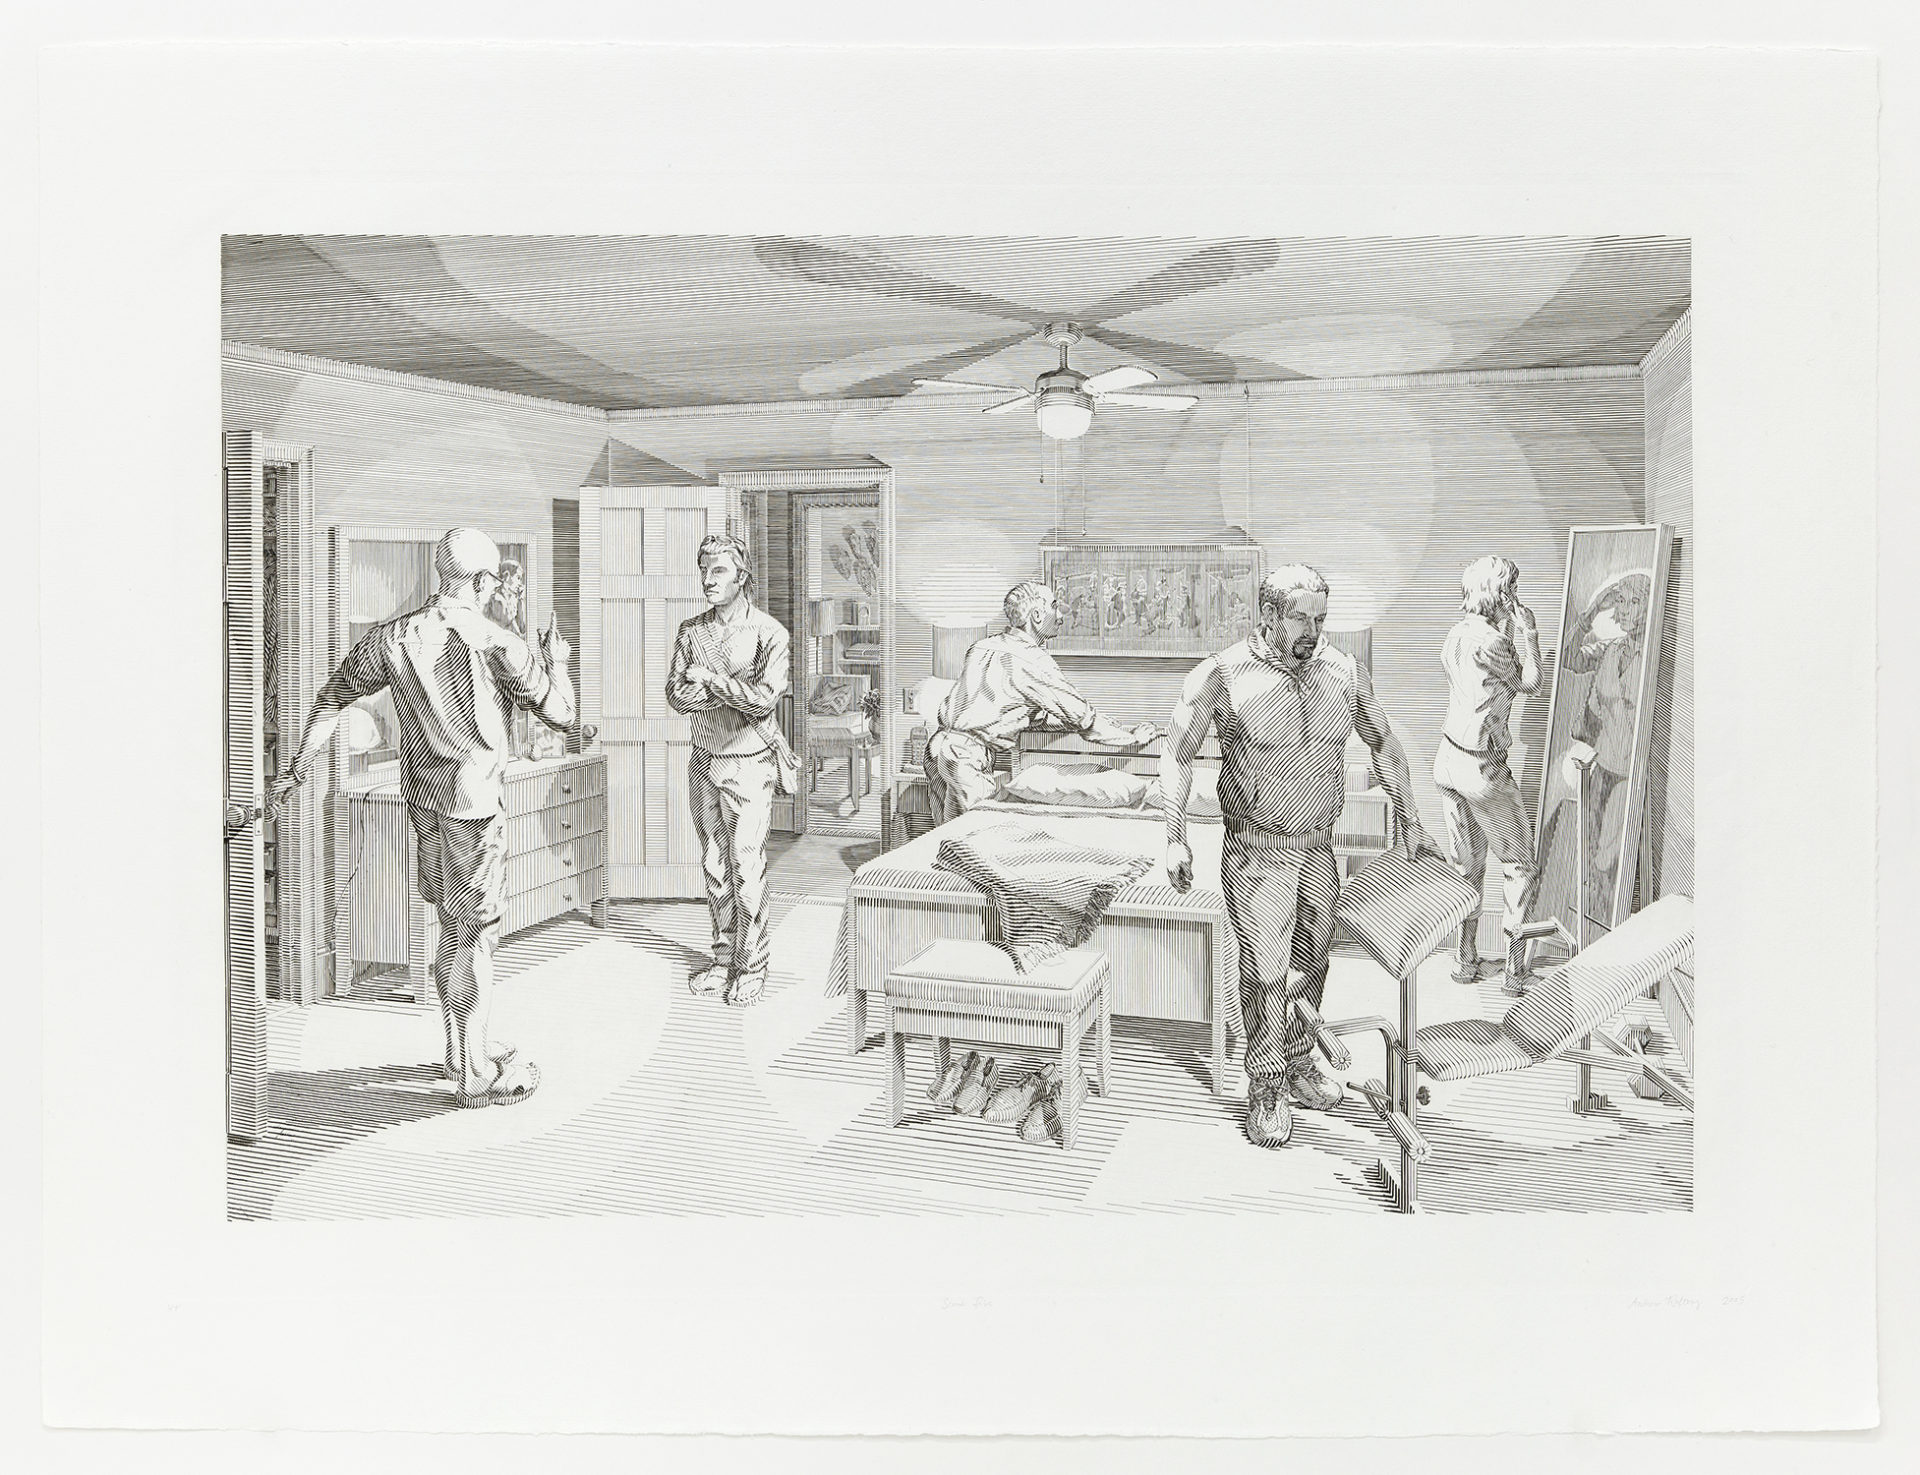 Open House: Five Engraved Scenes - Scene Five - Master Bedroom, 2008, Copperplate engraving, 22 x 30 inches (55.9 x 76.2 cm), Edition of 50